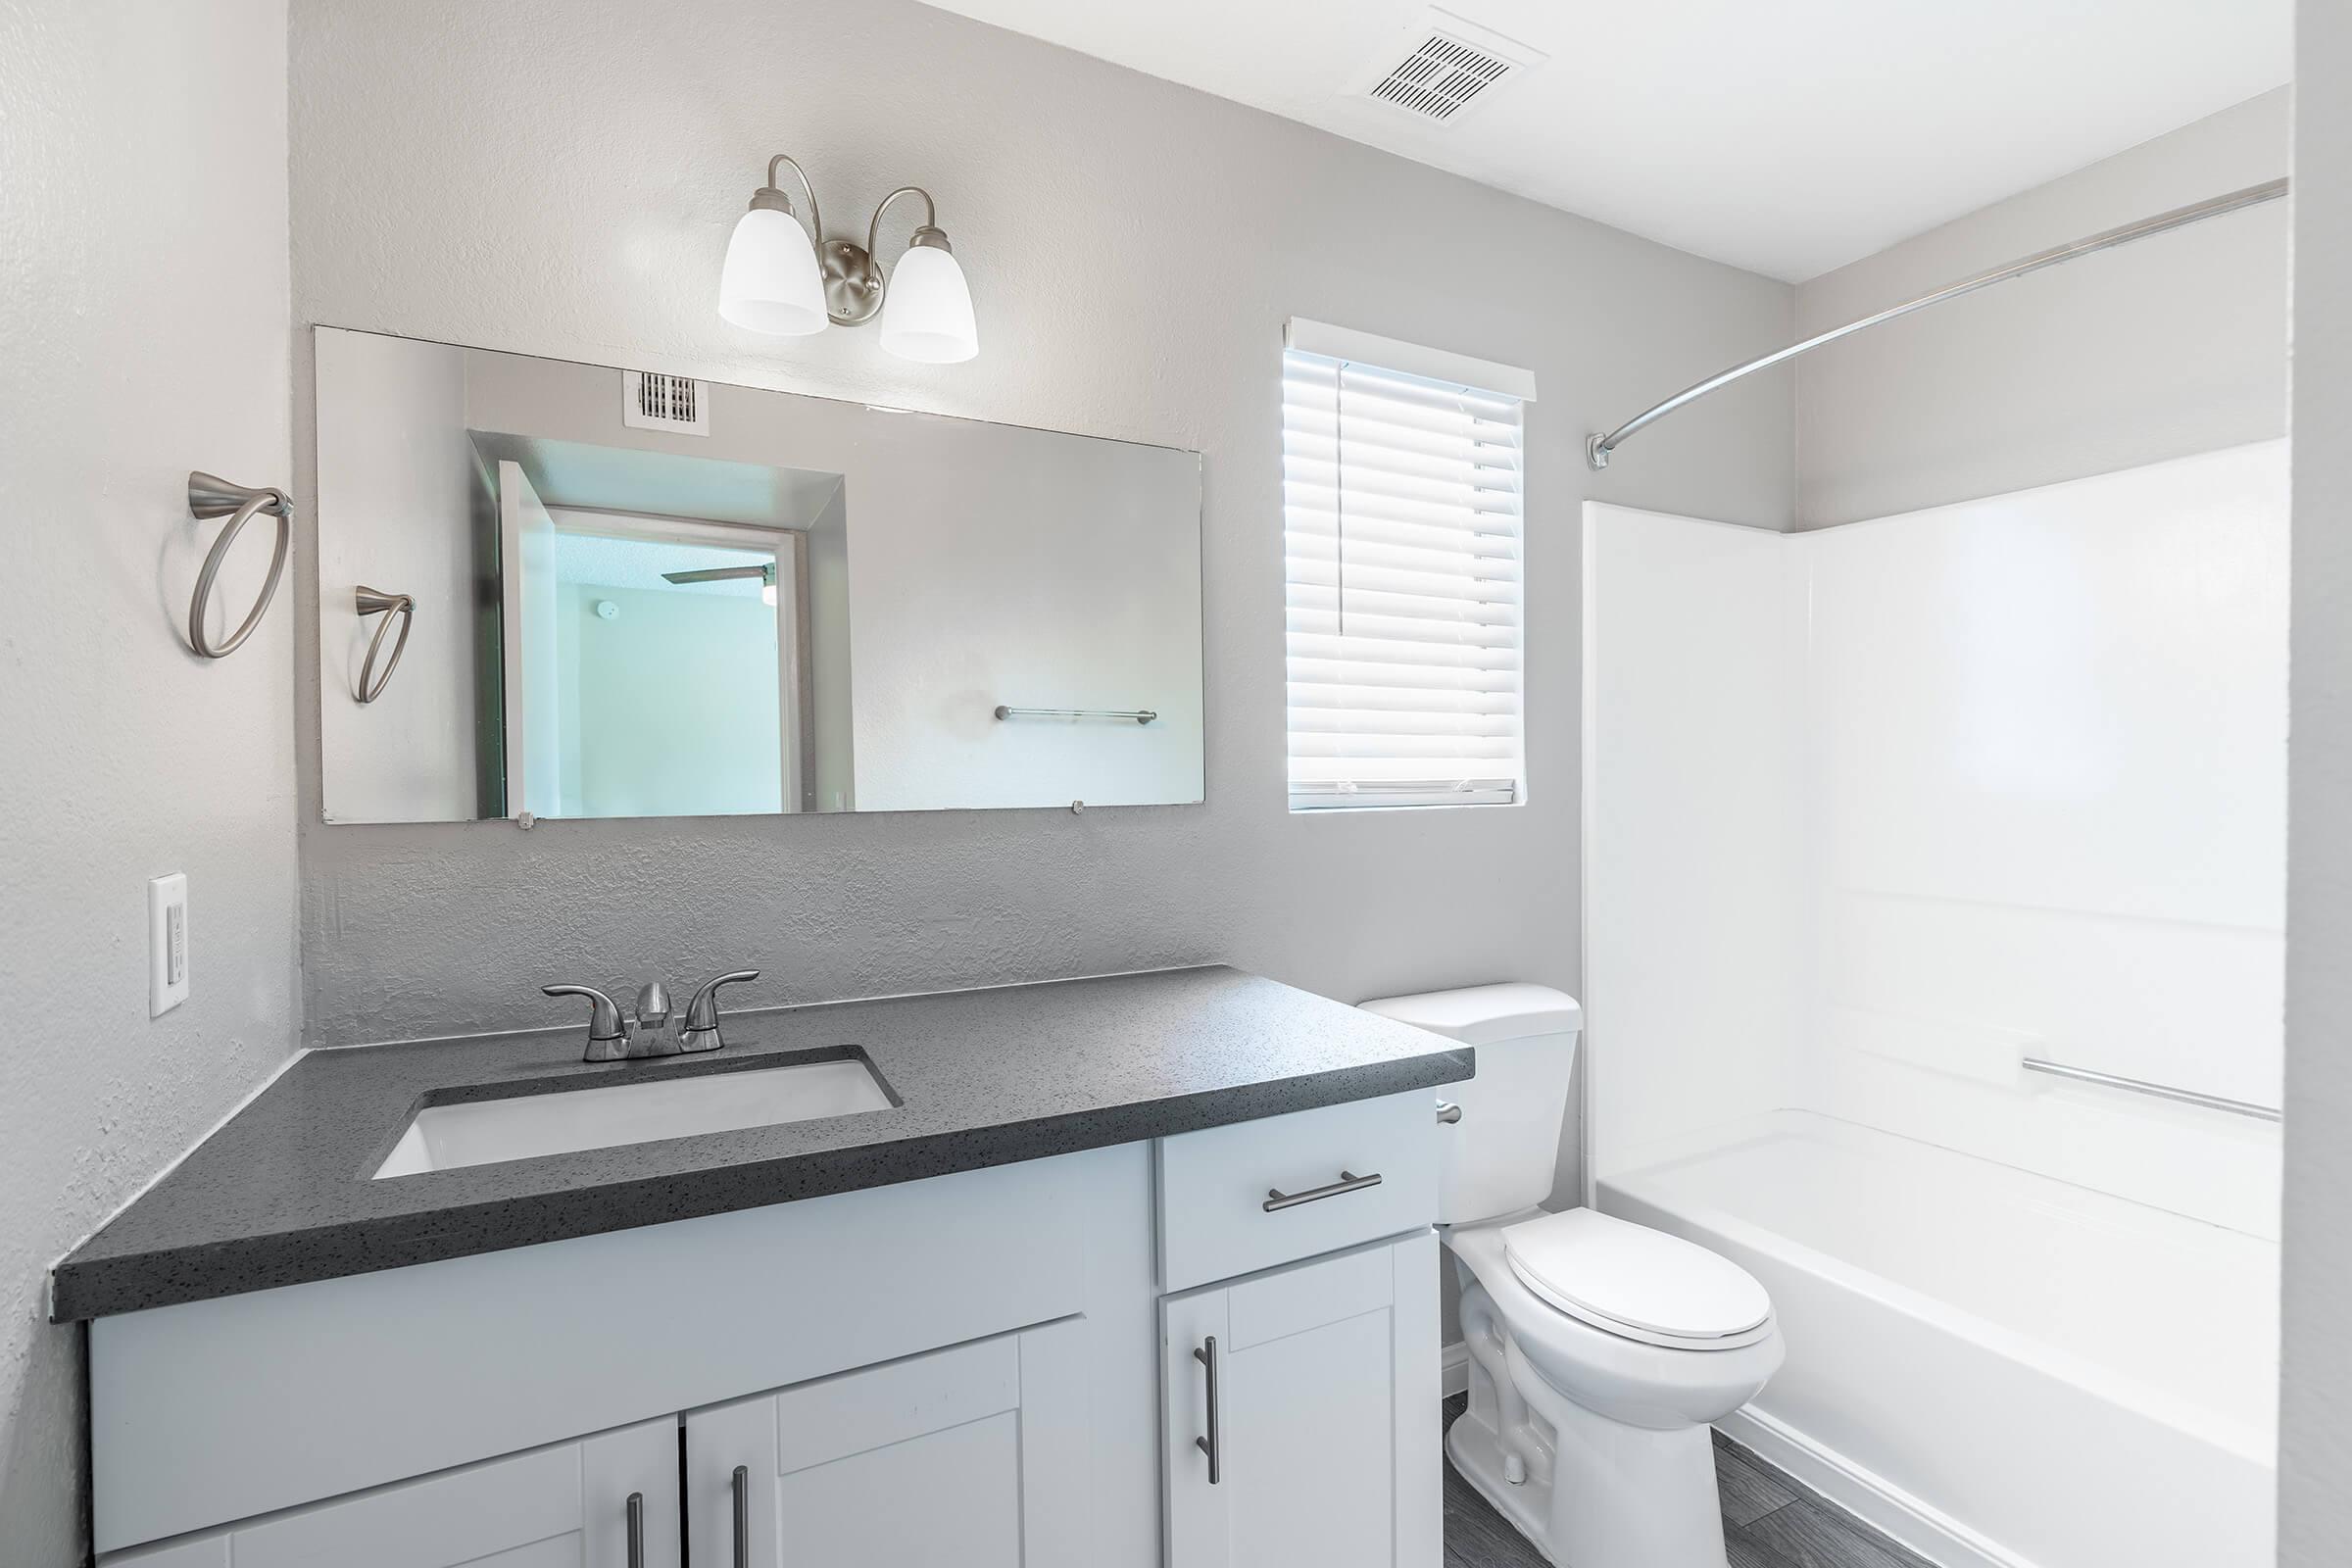 Renovated contemporary bathroom space with show, vanity, and toilet